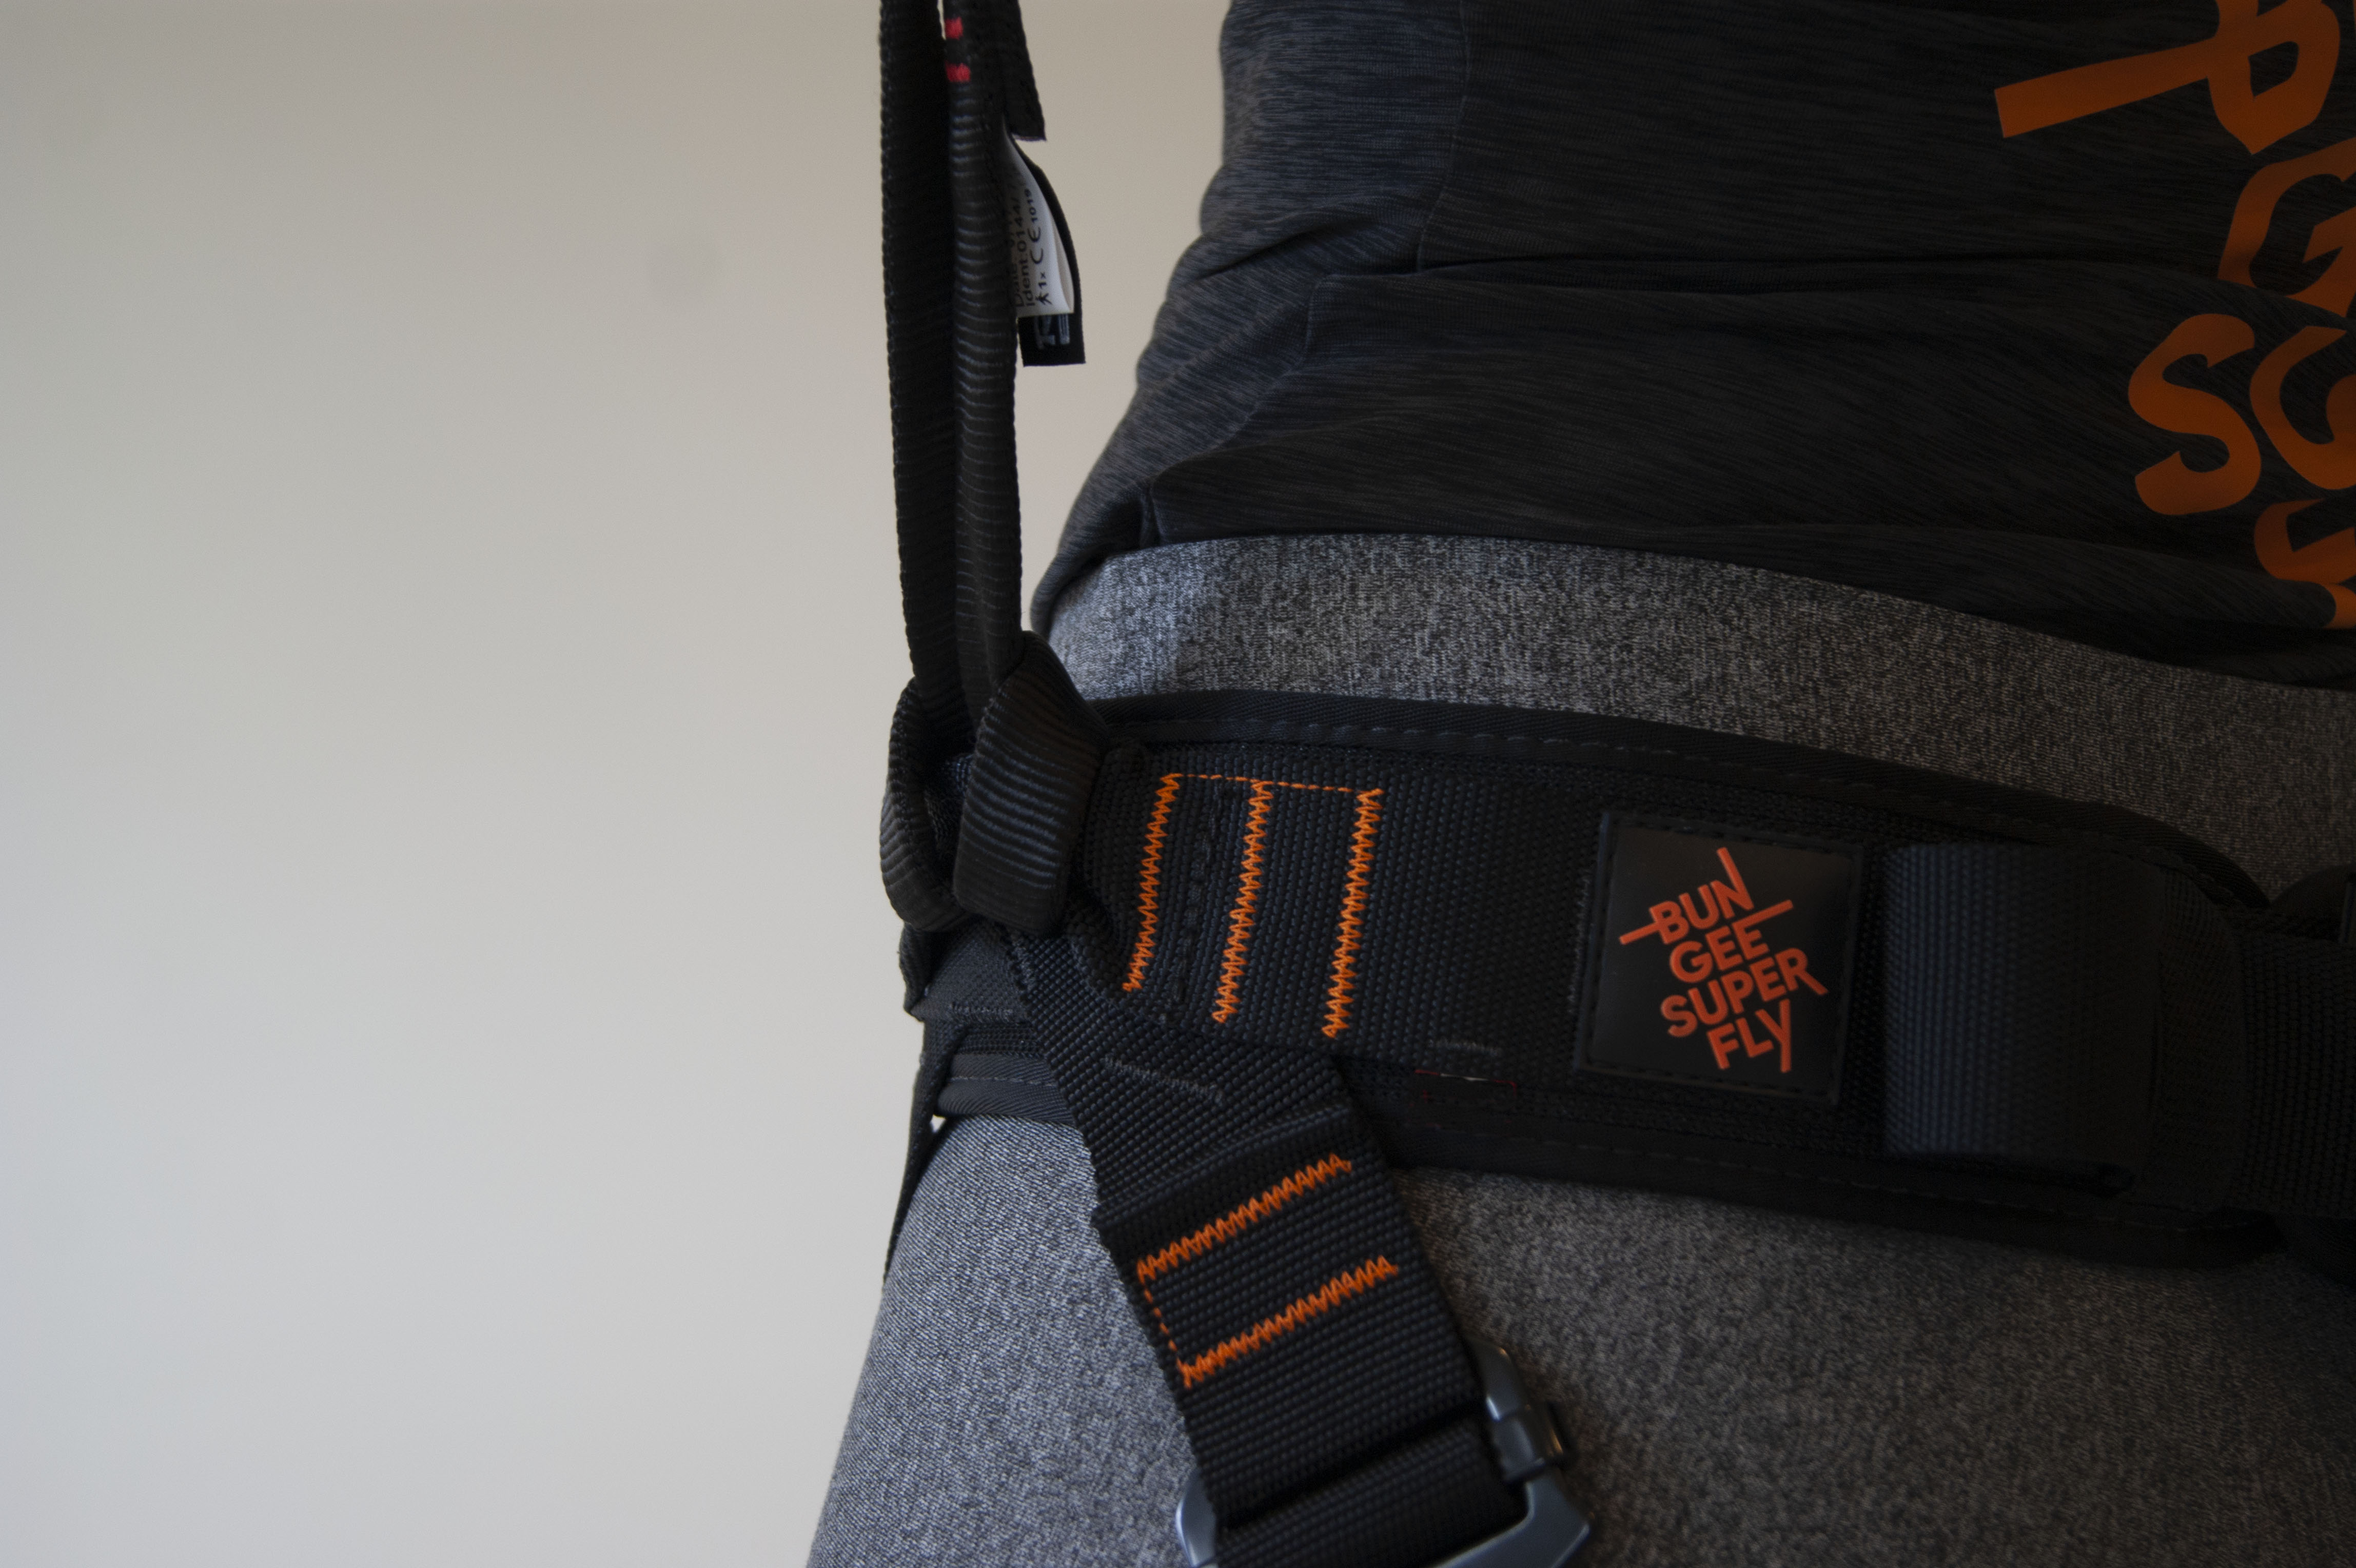 Bungee Super Fly® Harness, part of Bungee Equipment